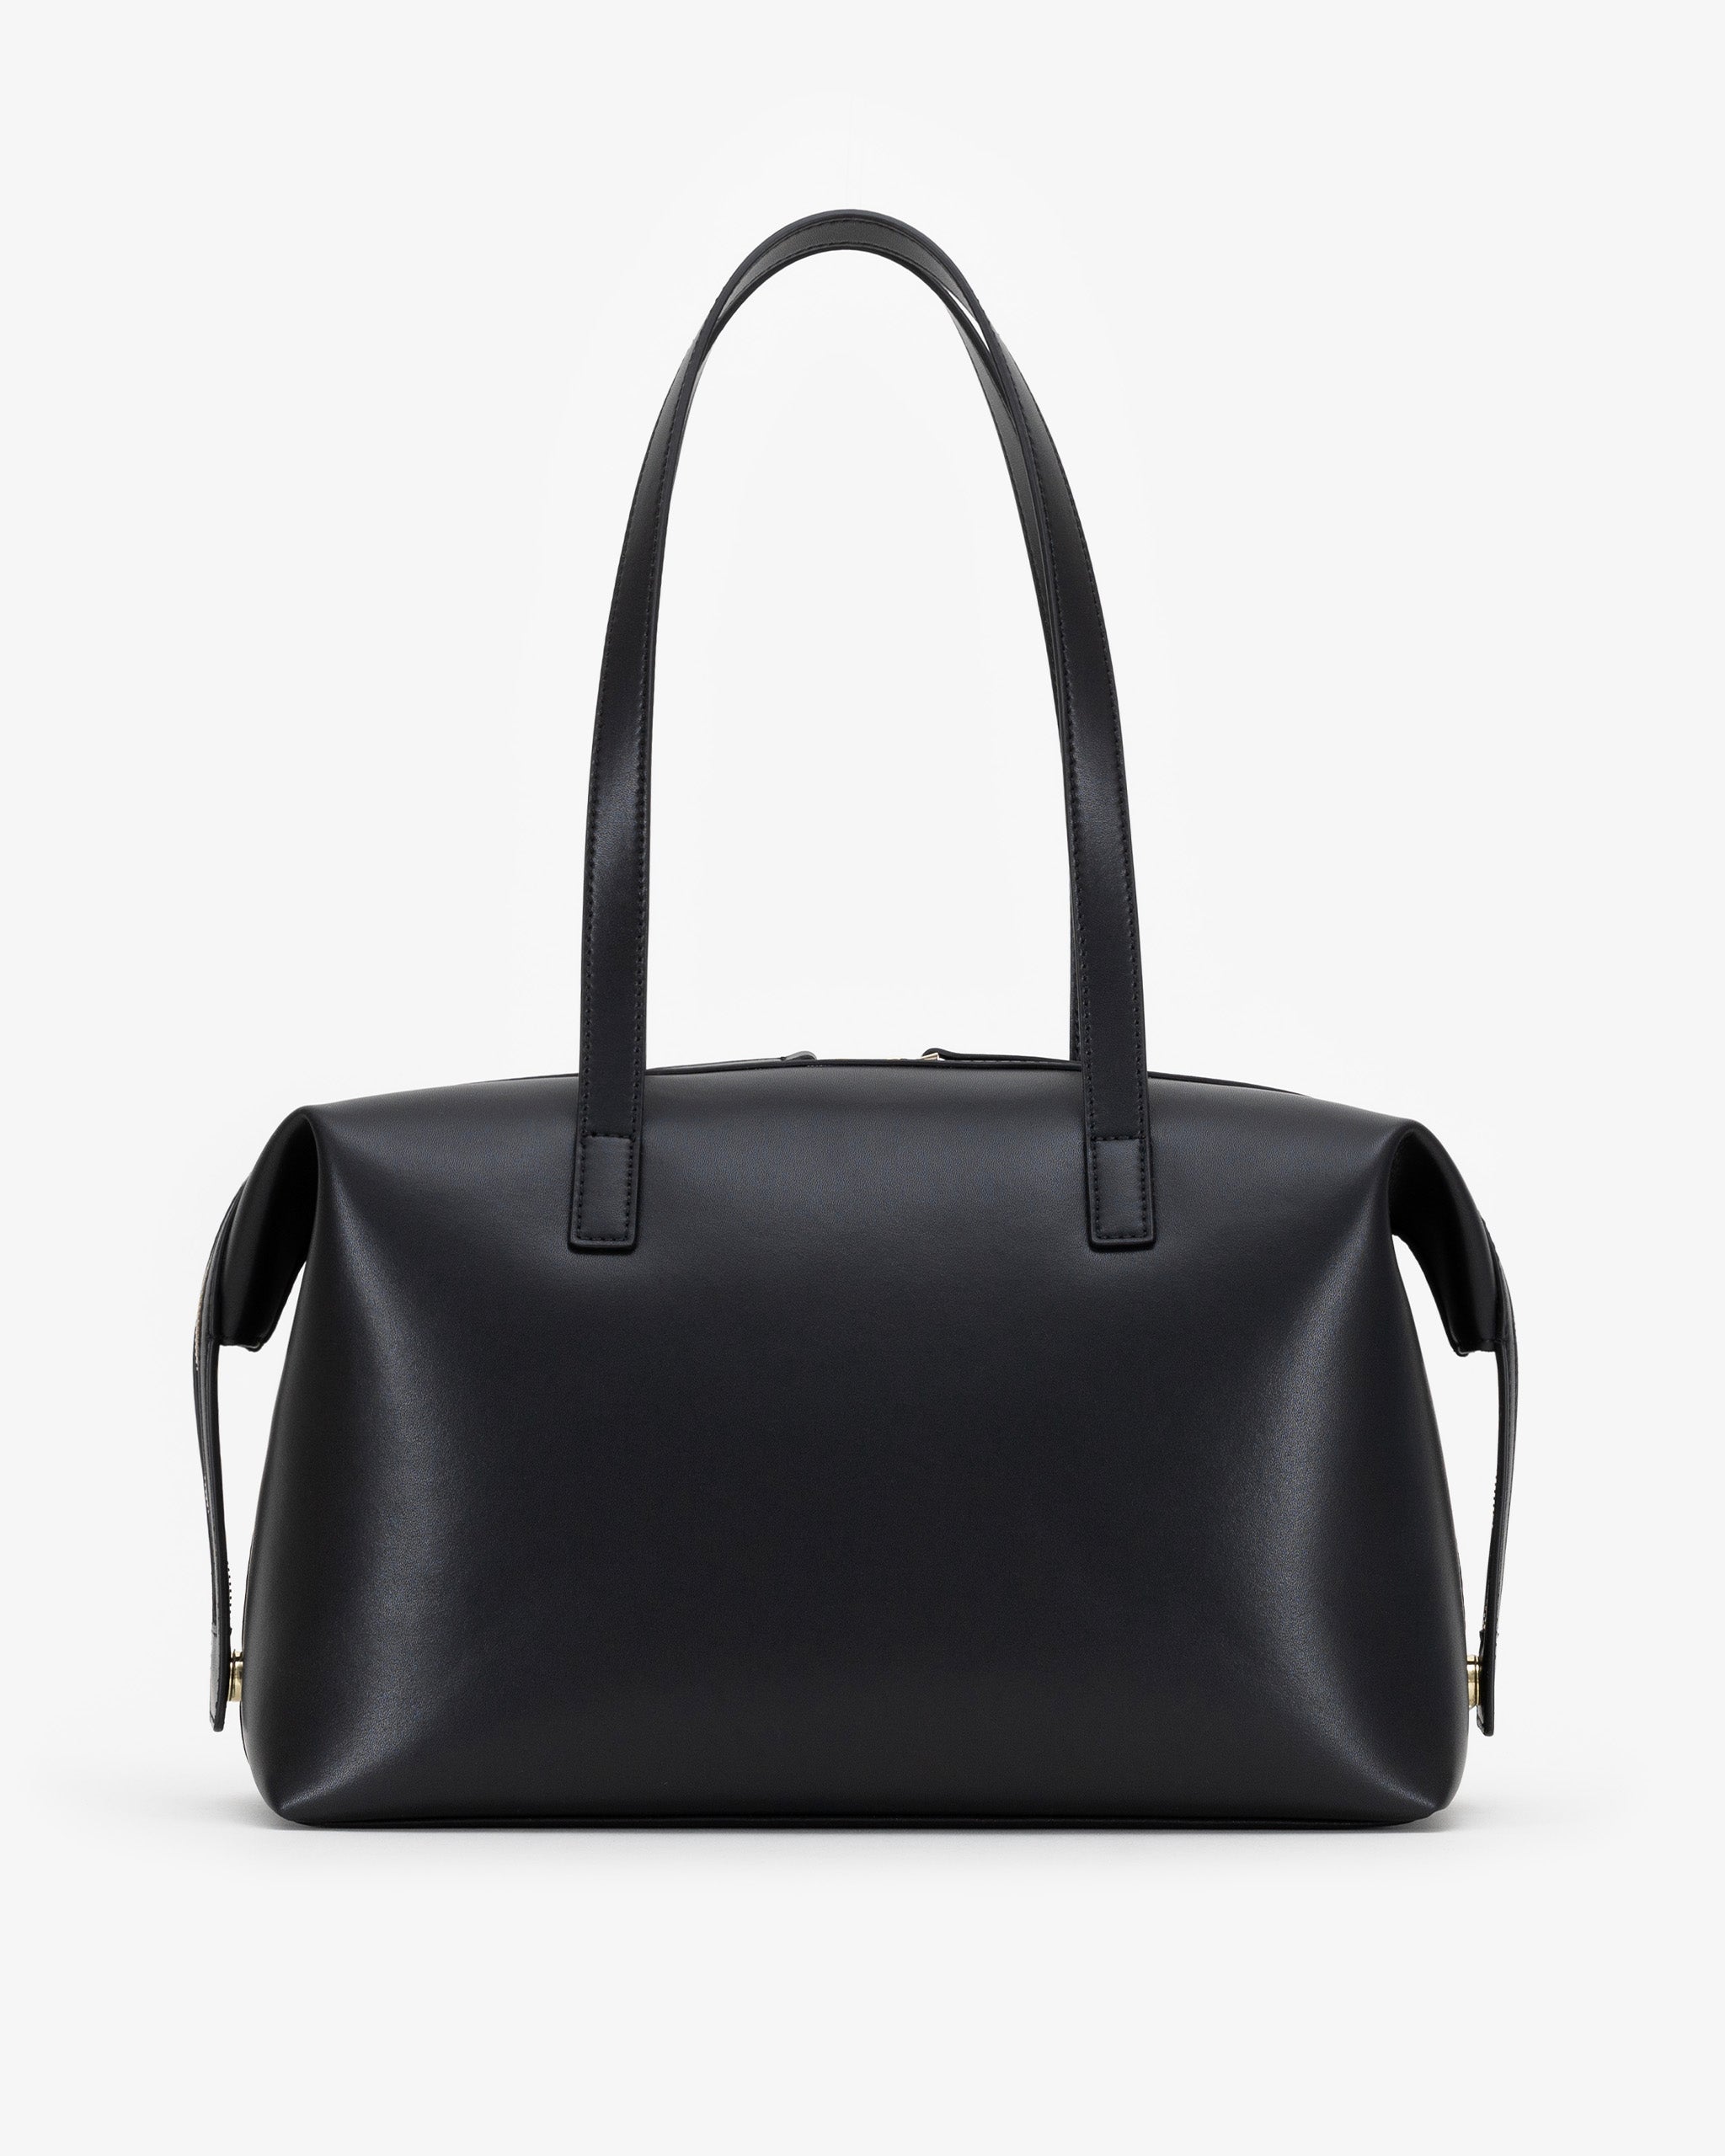 Pre-order (Mid-May): Bowling Bag in Black with Personalised Hardware